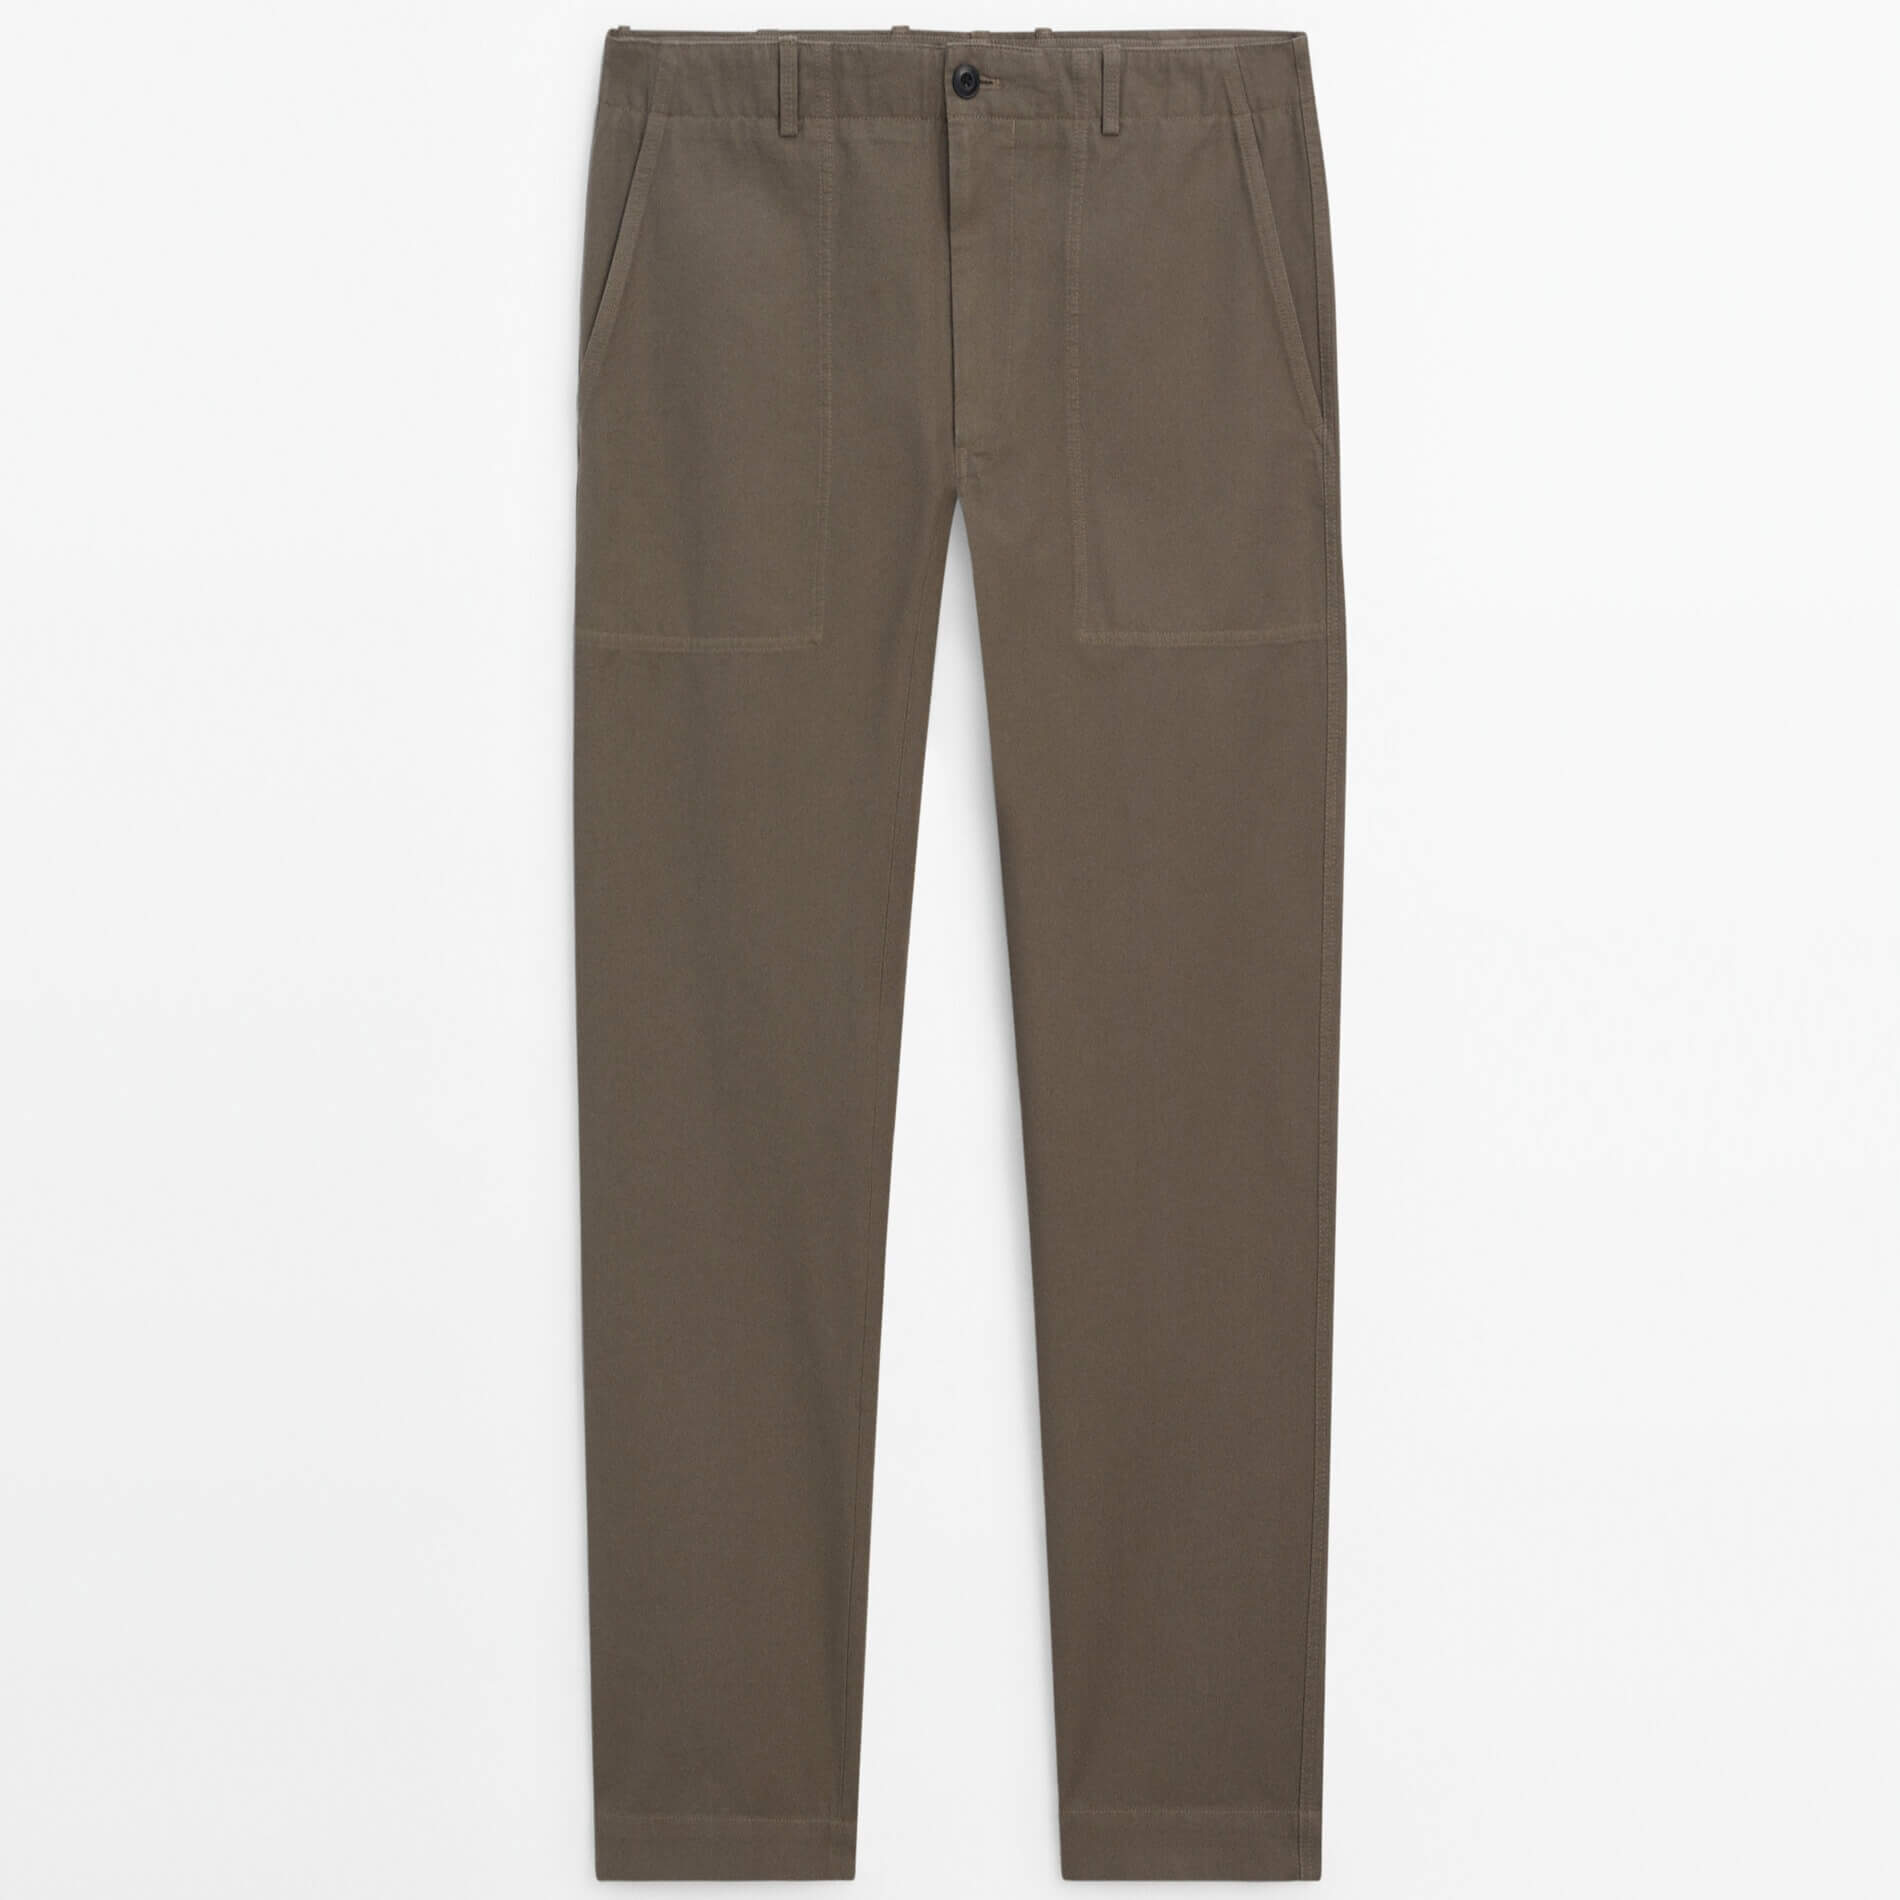 Брюки Massimo Dutti Relaxed Fit Canvas, хаки брюки massimo dutti relaxed fit belted chino бежевый